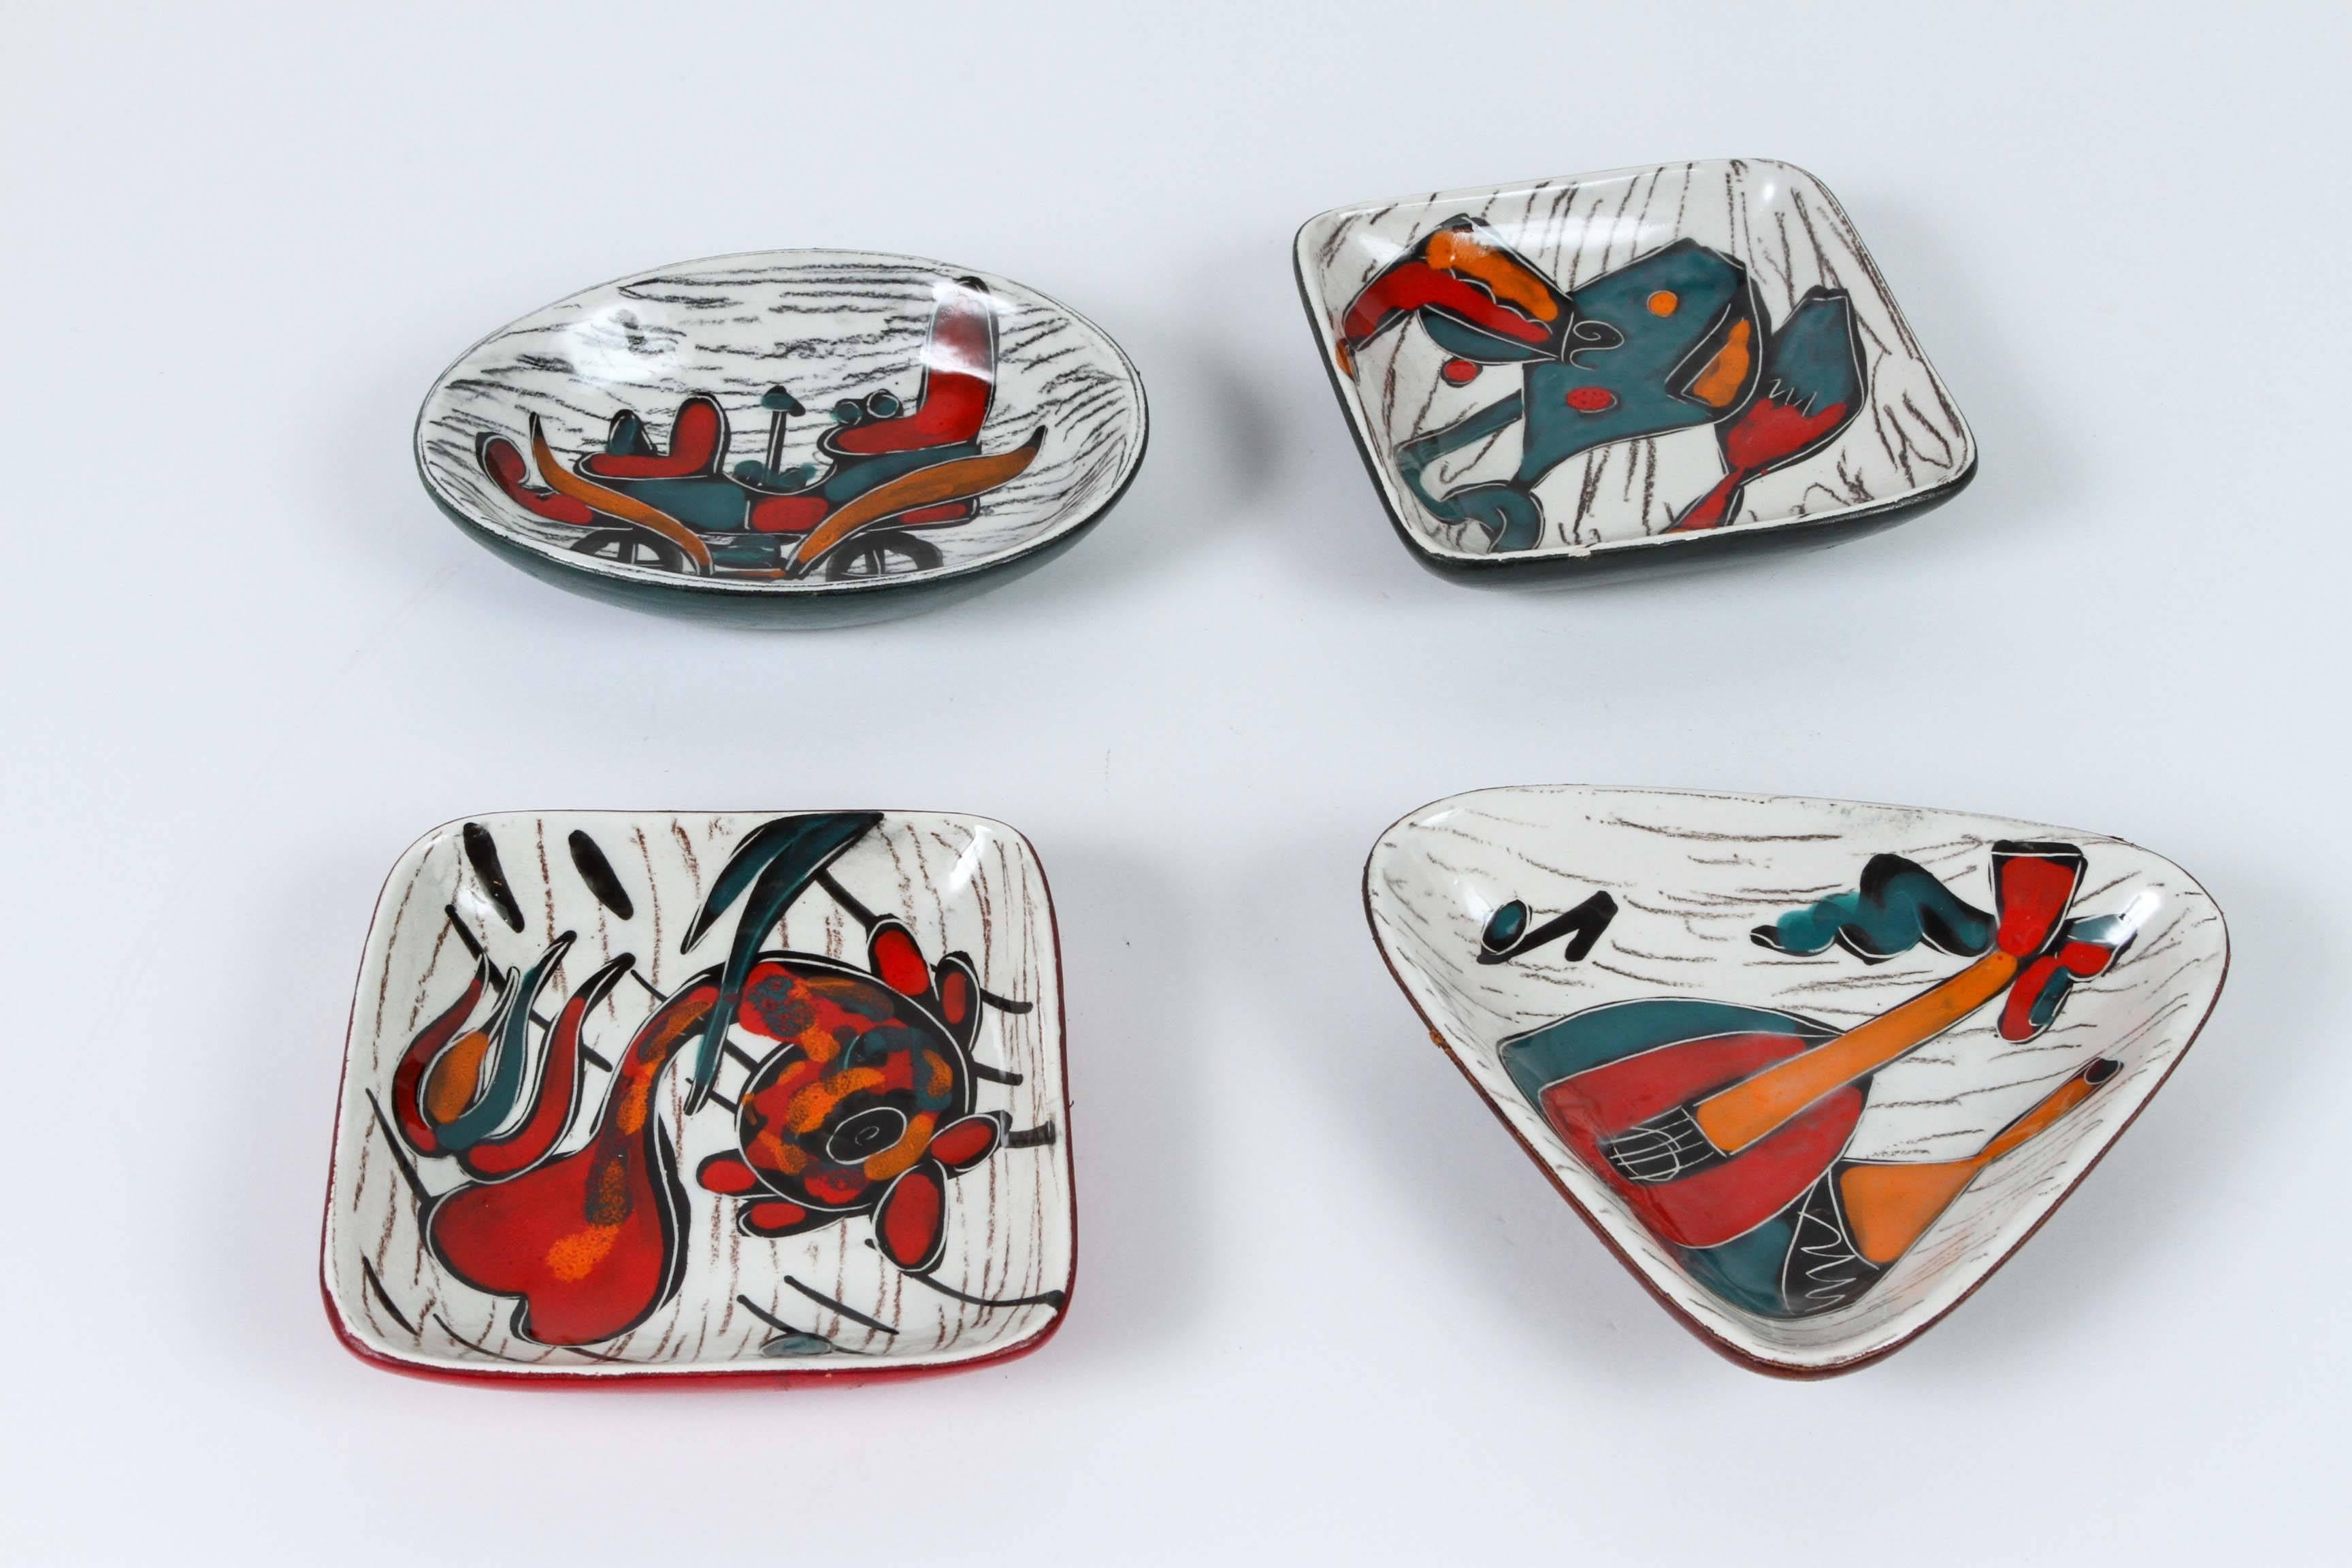 1950 Italian retro leather backed decorative ceramic set of four small dishes, handcrafted ceramics with stylized colorful hand-painted designs.
Ceramic change trays or jewelry tray or ashtrays.
Measures: Smaller: 2 5/8